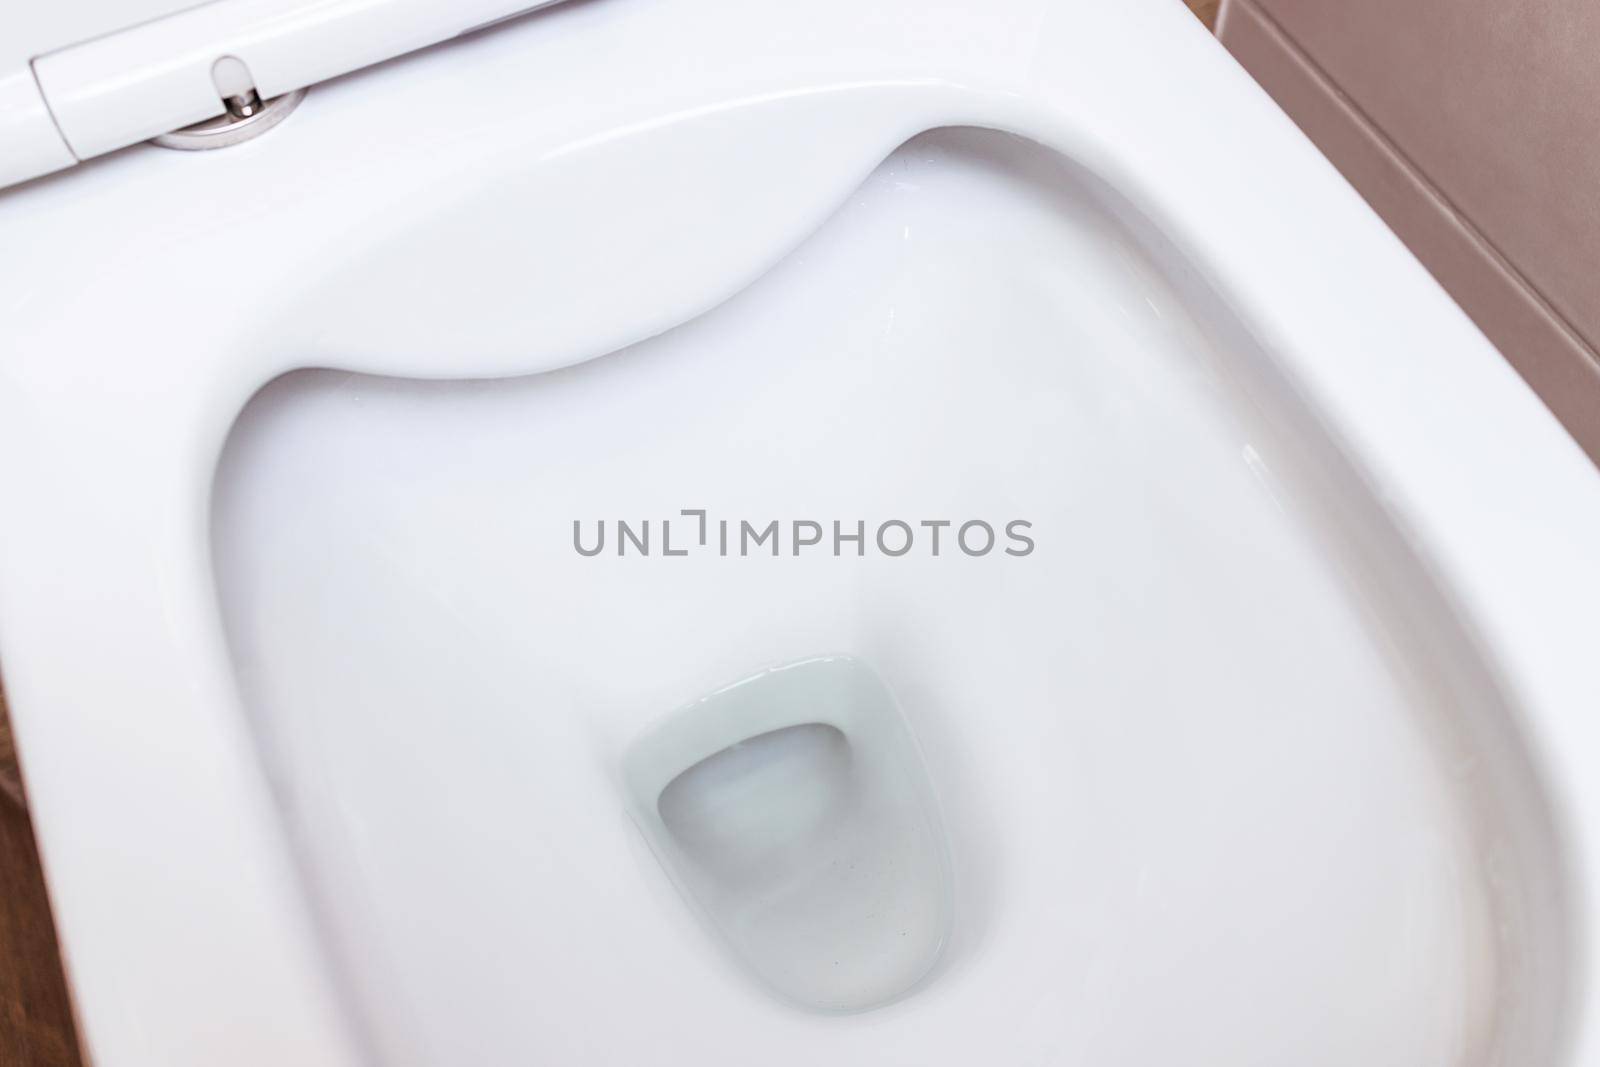 Large modern white toilet close-up. Clean bowl. The concept of hygiene, cleaning by Ramanouskaya